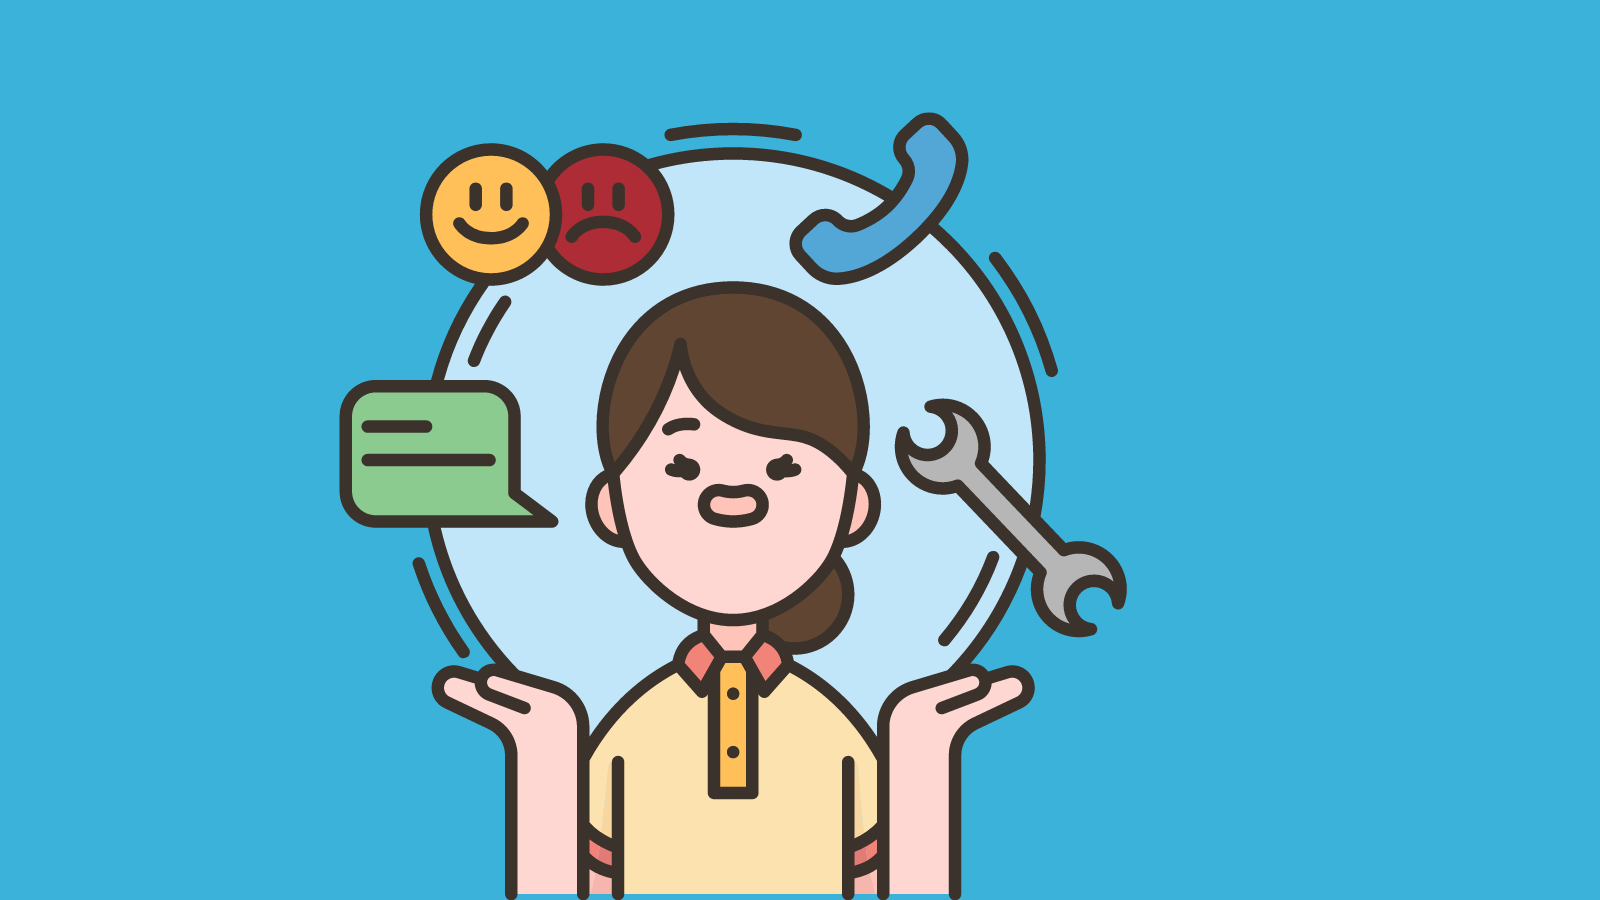 A young woman with a speech bubble, a smiley face, a sad face, a phone, and a wrench floating around her head